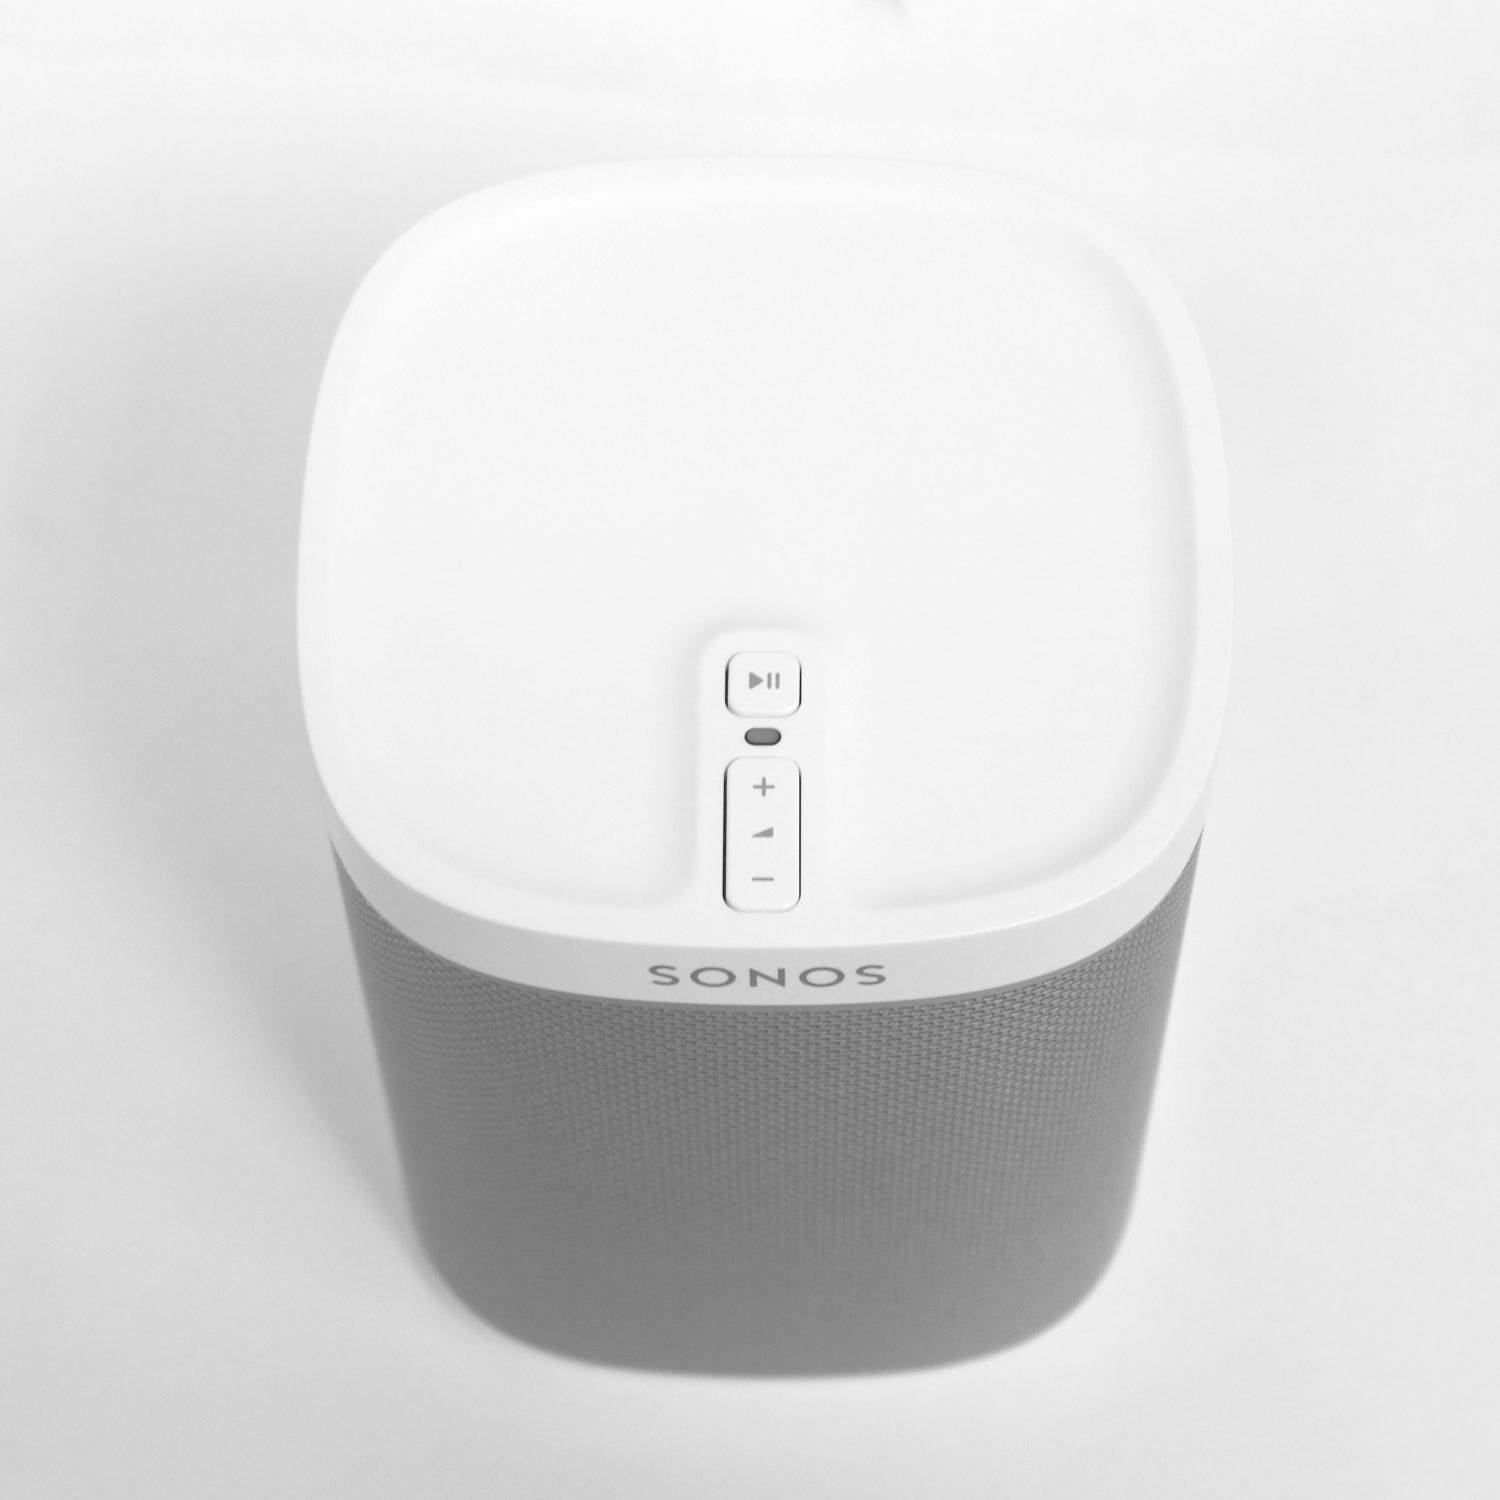 Sonos PLAY:1 Compact Smart Speaker for Streaming Music, White - image 3 of 5